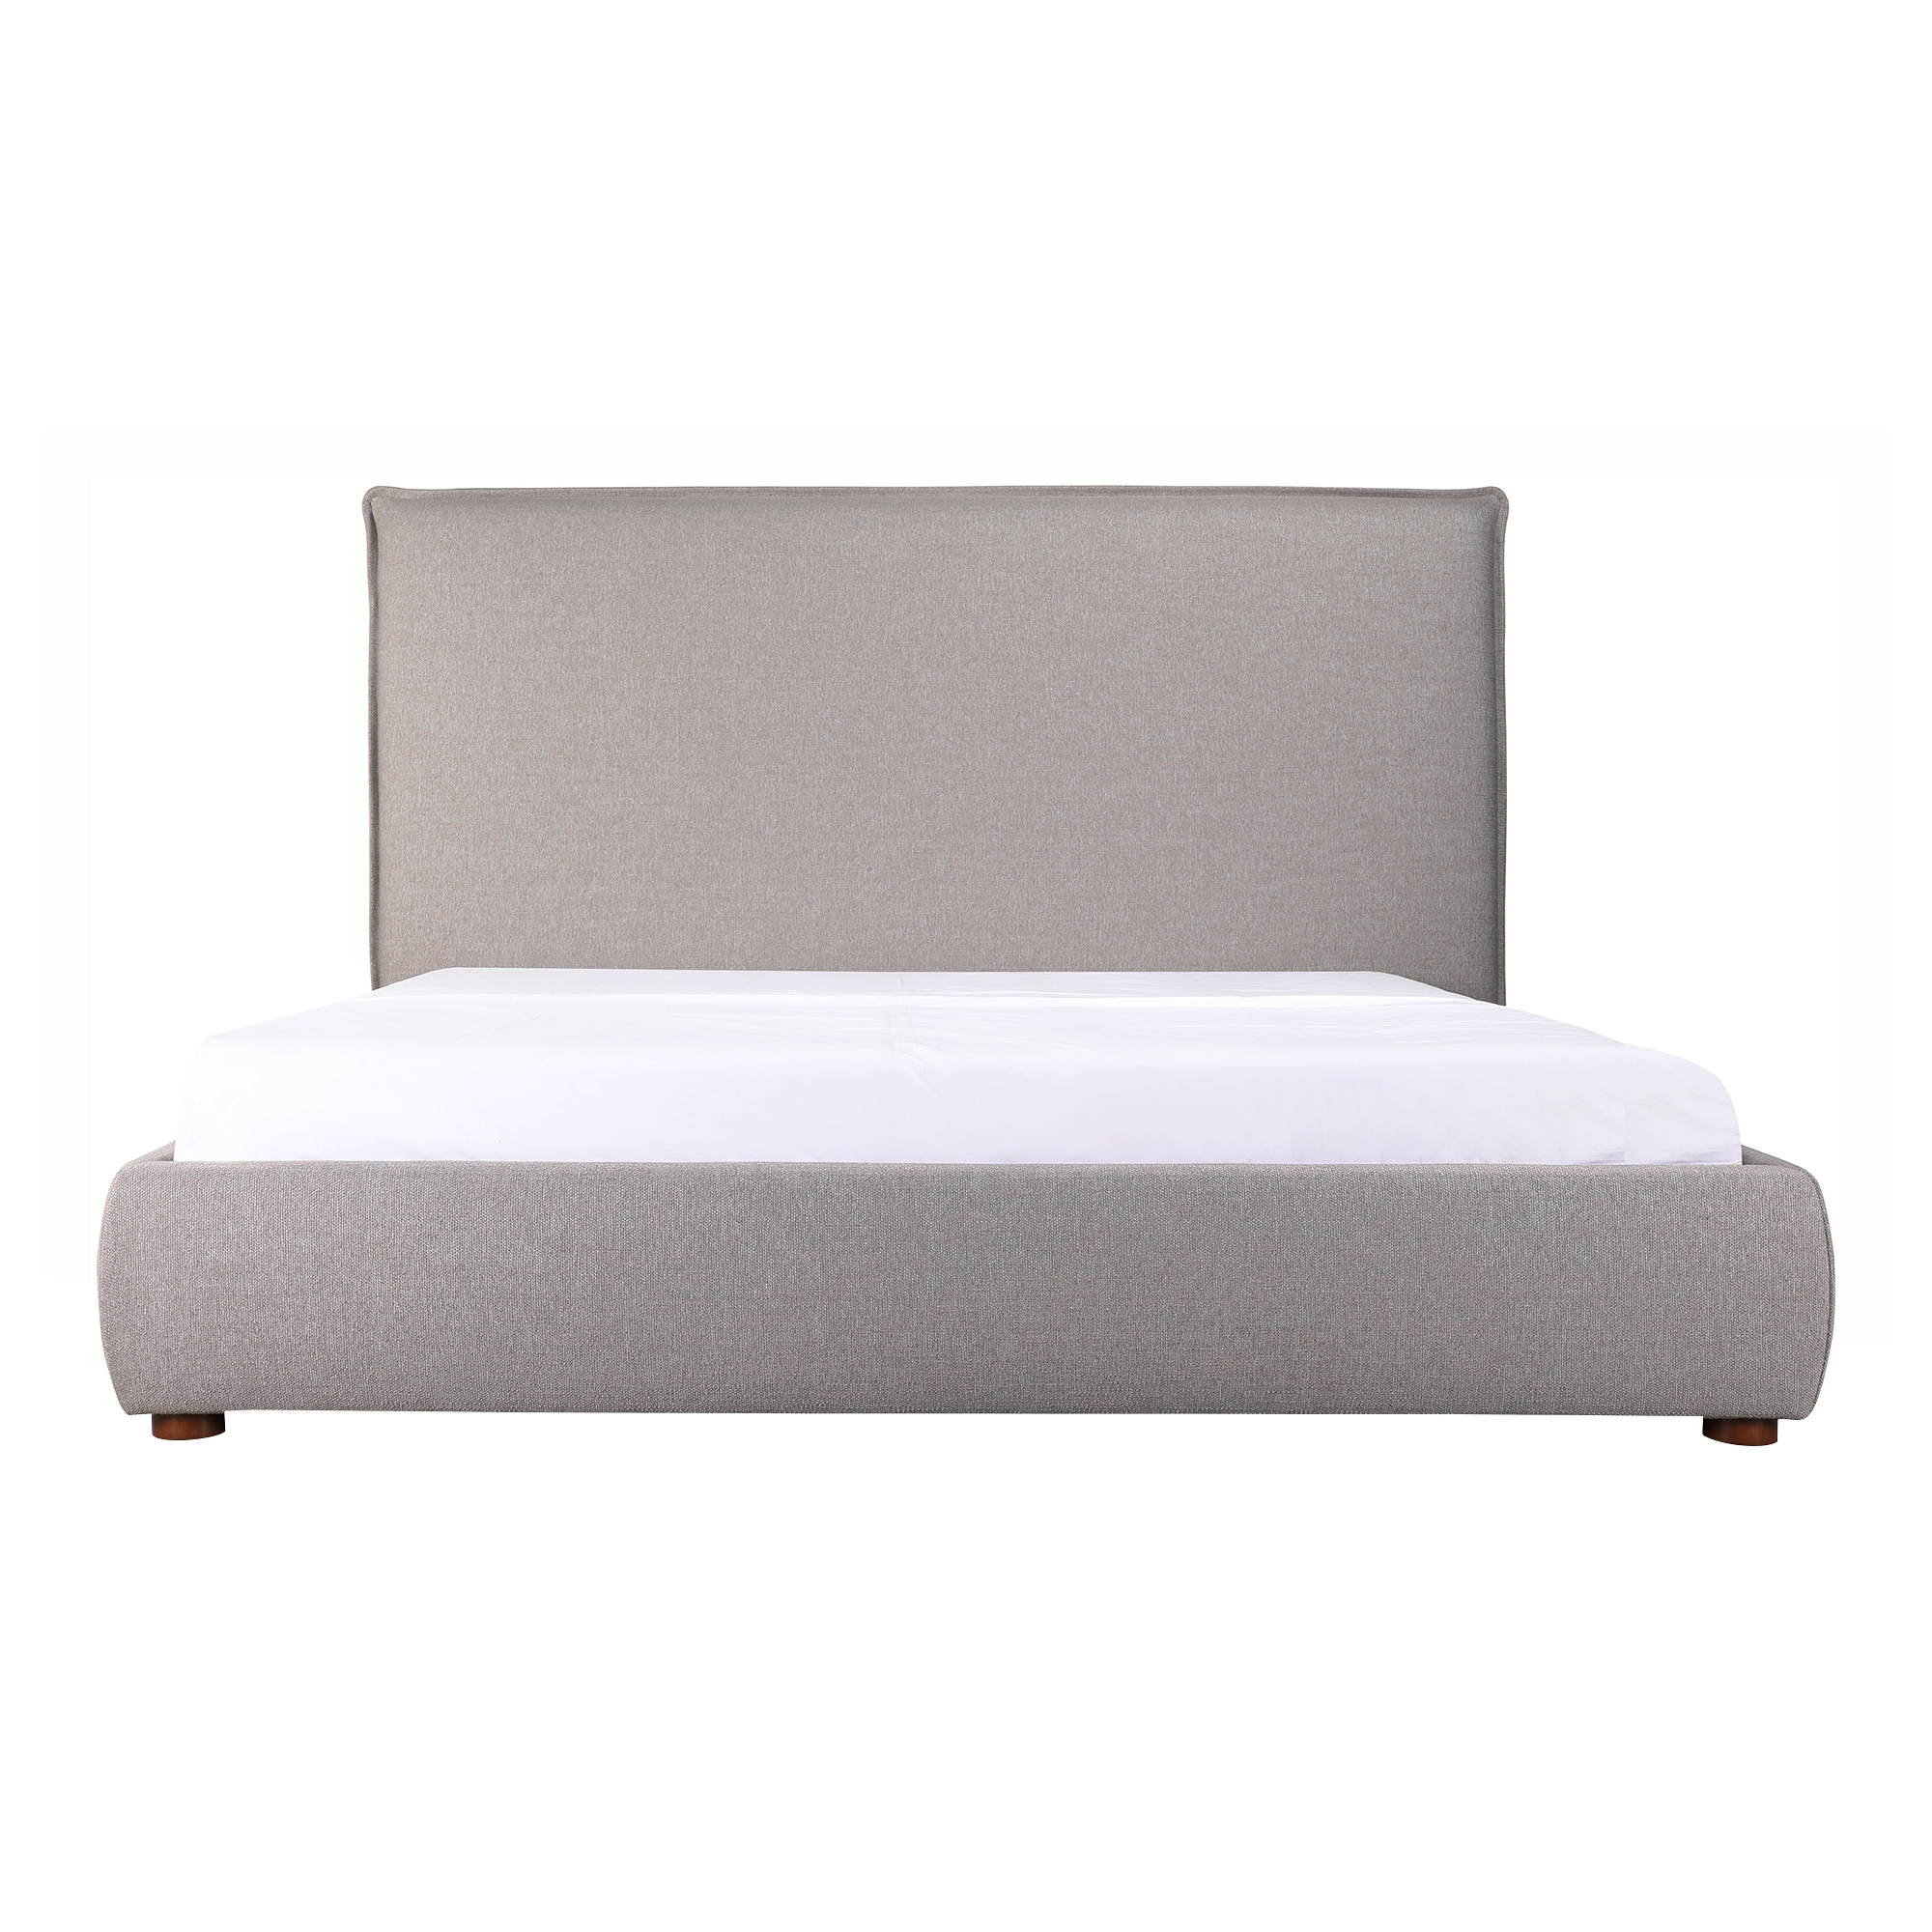 Luzon Queen Bed Tall Headboard Greystone - Image 5